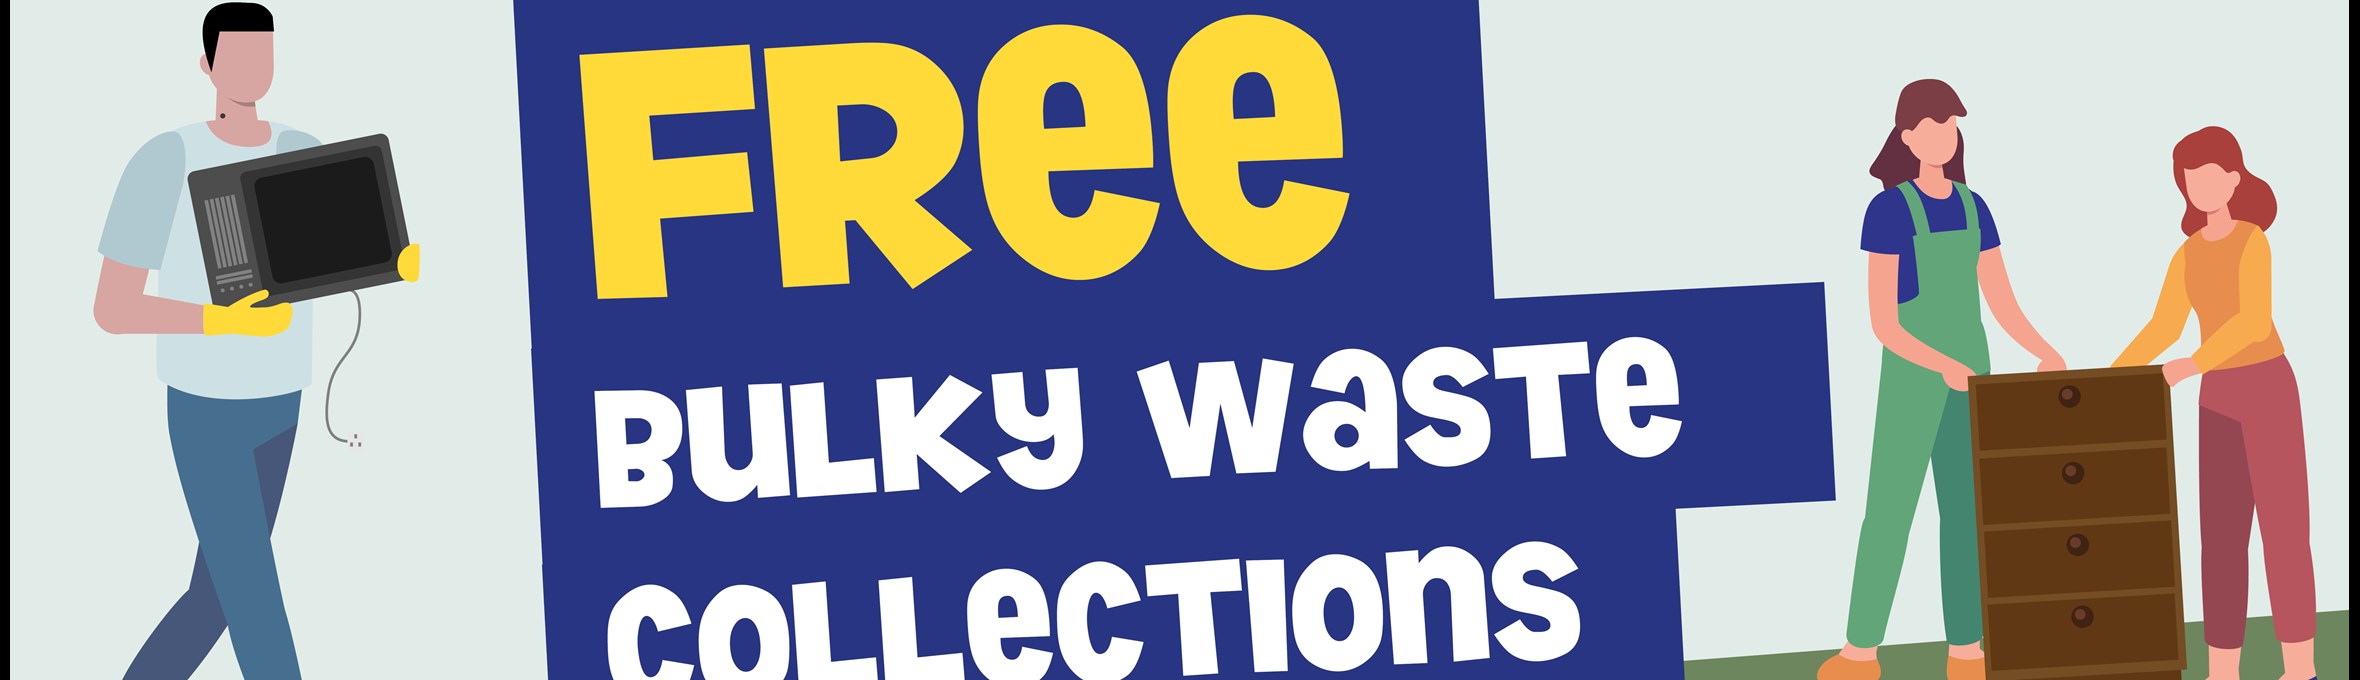 Free bulky waste collections available to book now visit www.ashfield.gov.uk/bulkywaste